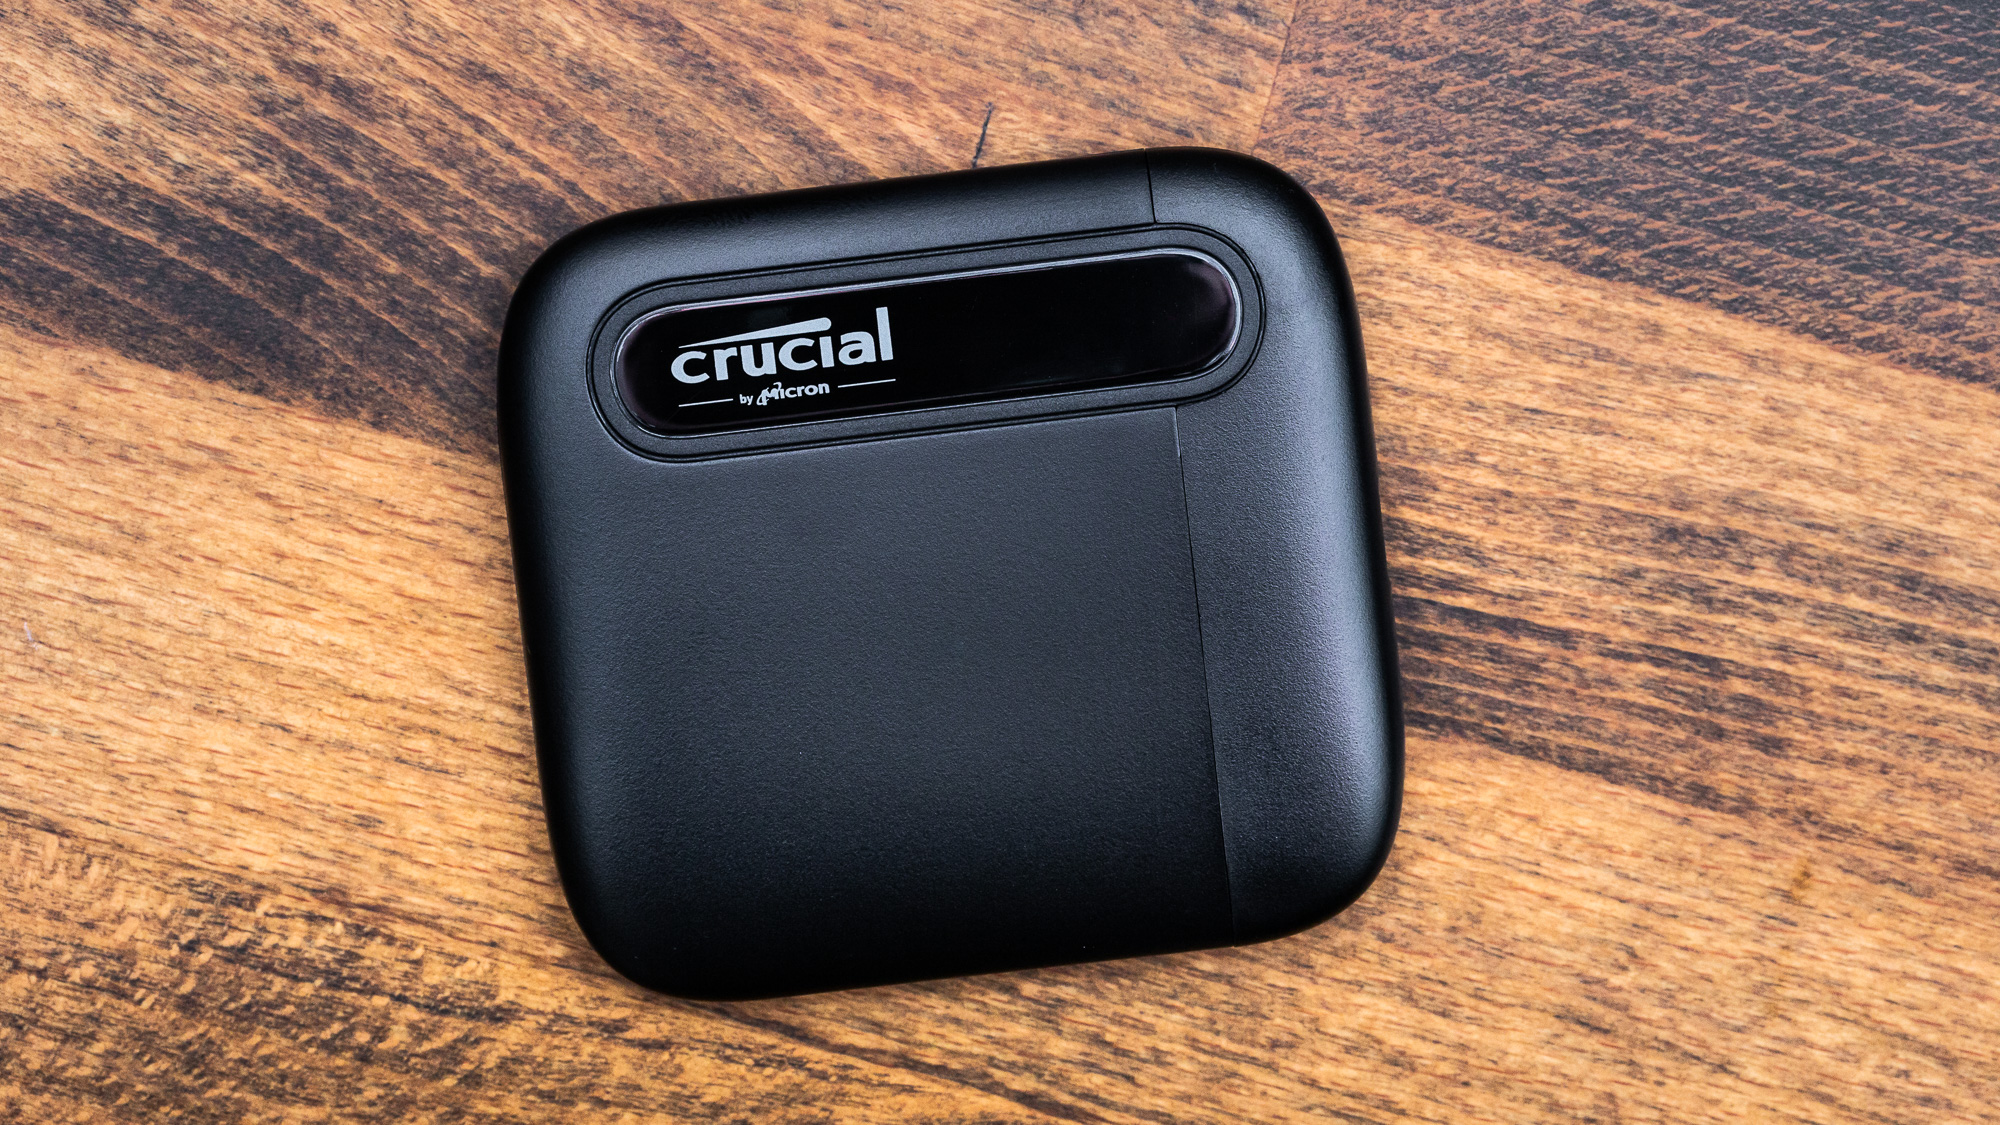 Crucial X6 Portable SSD - 4TB in your pocket! 